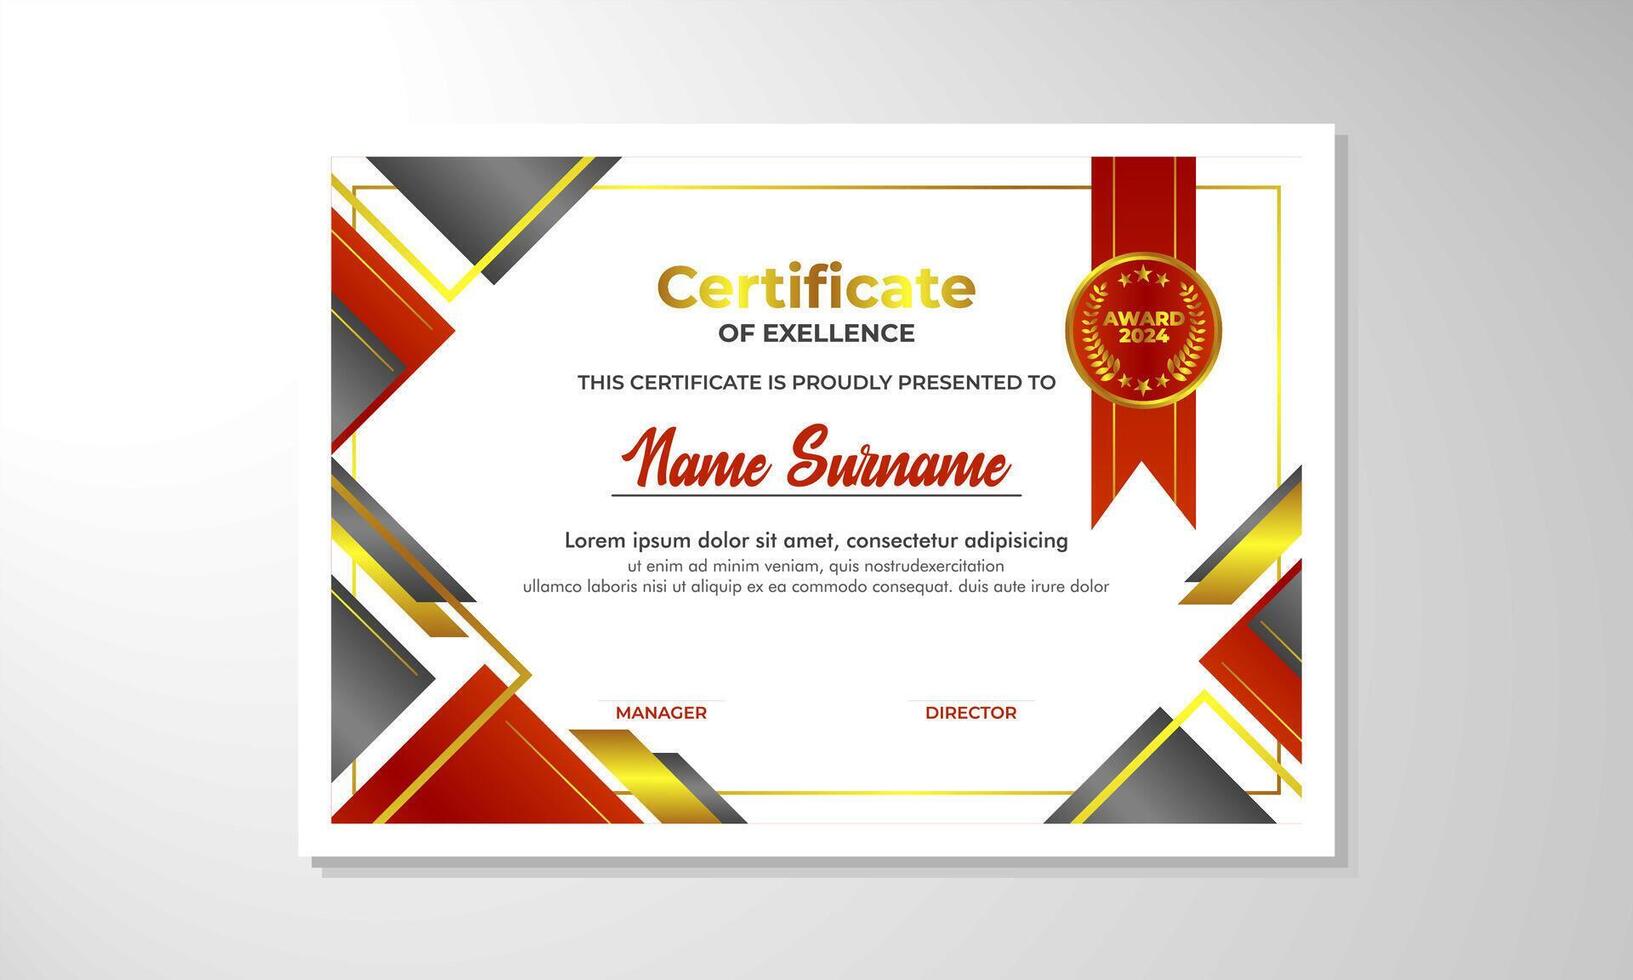 Certificate template with professional clean design. Vector illustration. Certificate of achievement abstract geometric texture decoration